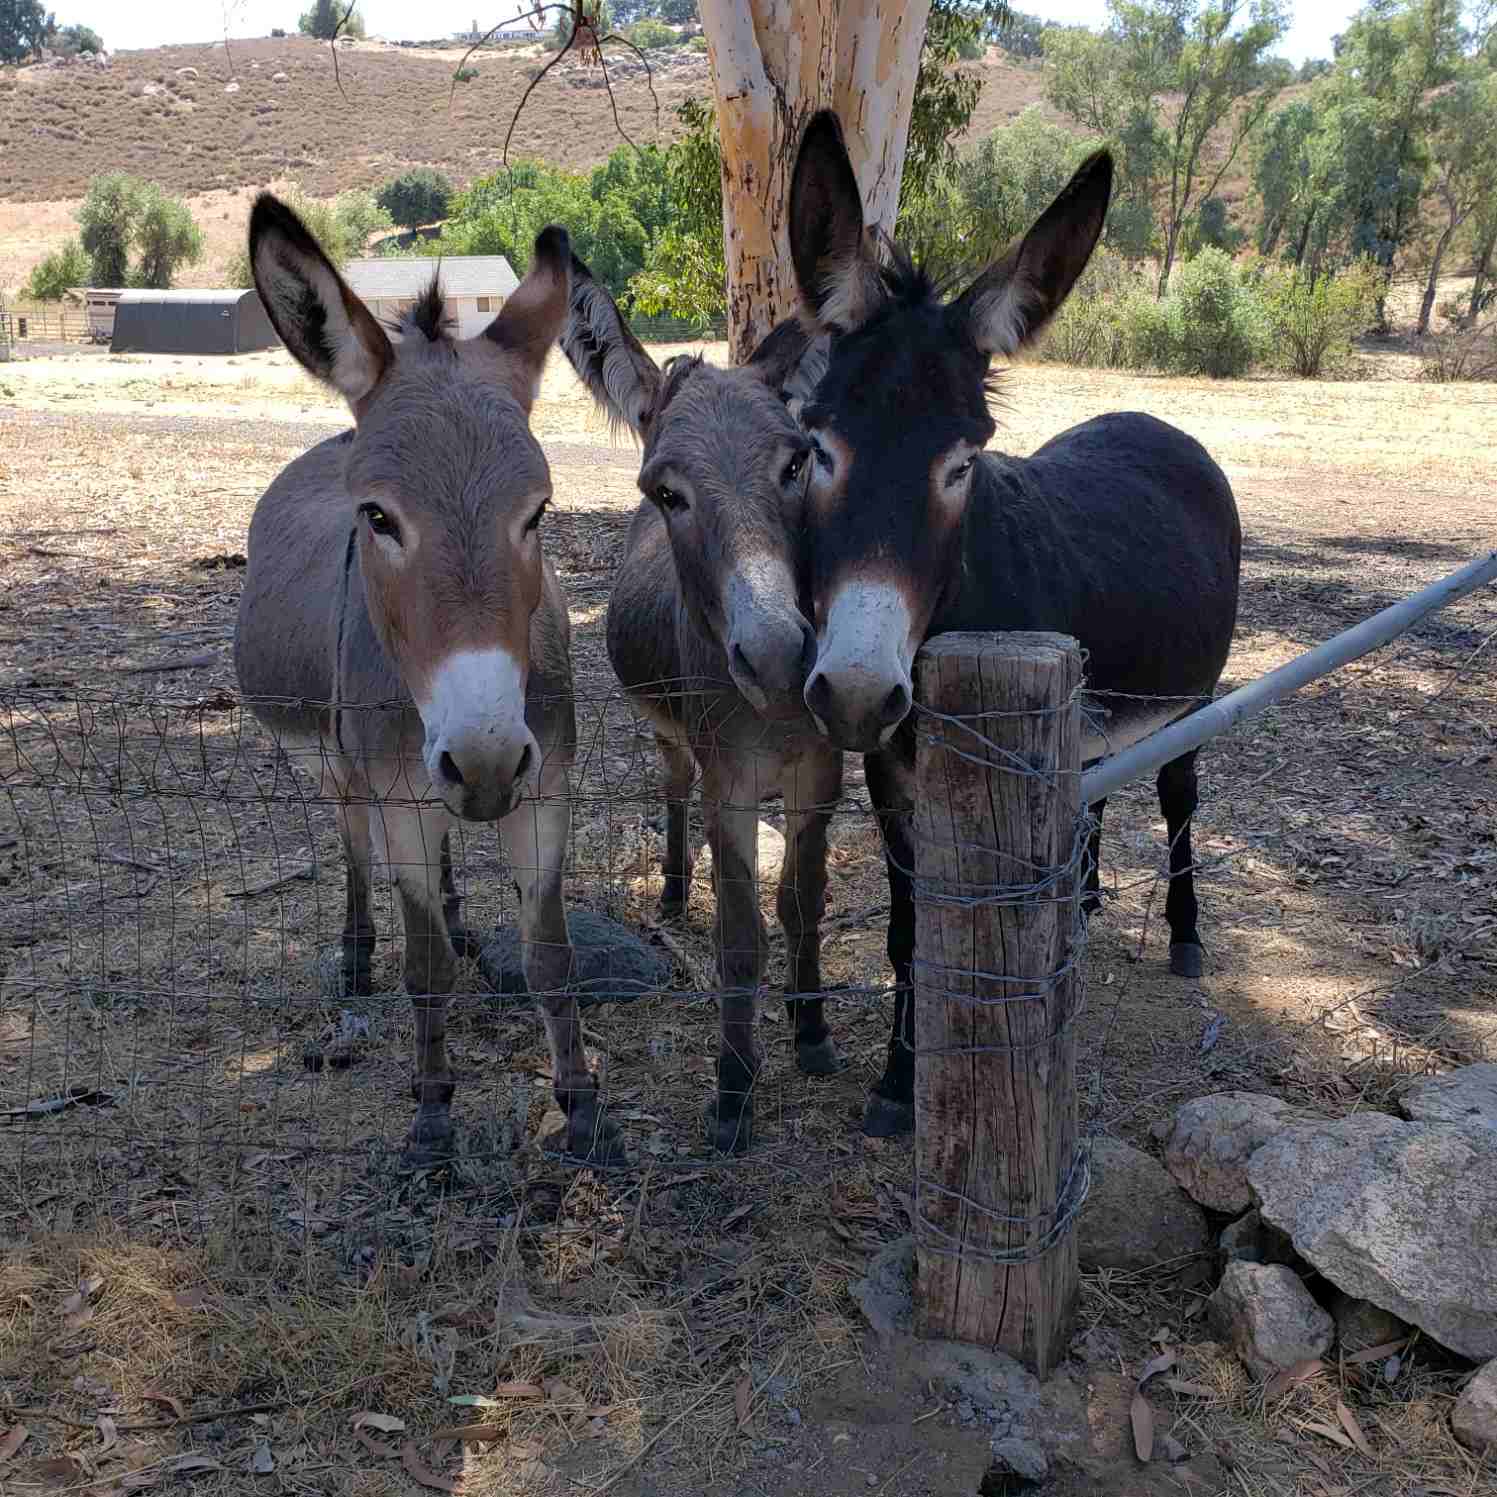 Hee Haw Place Donkey Rescue